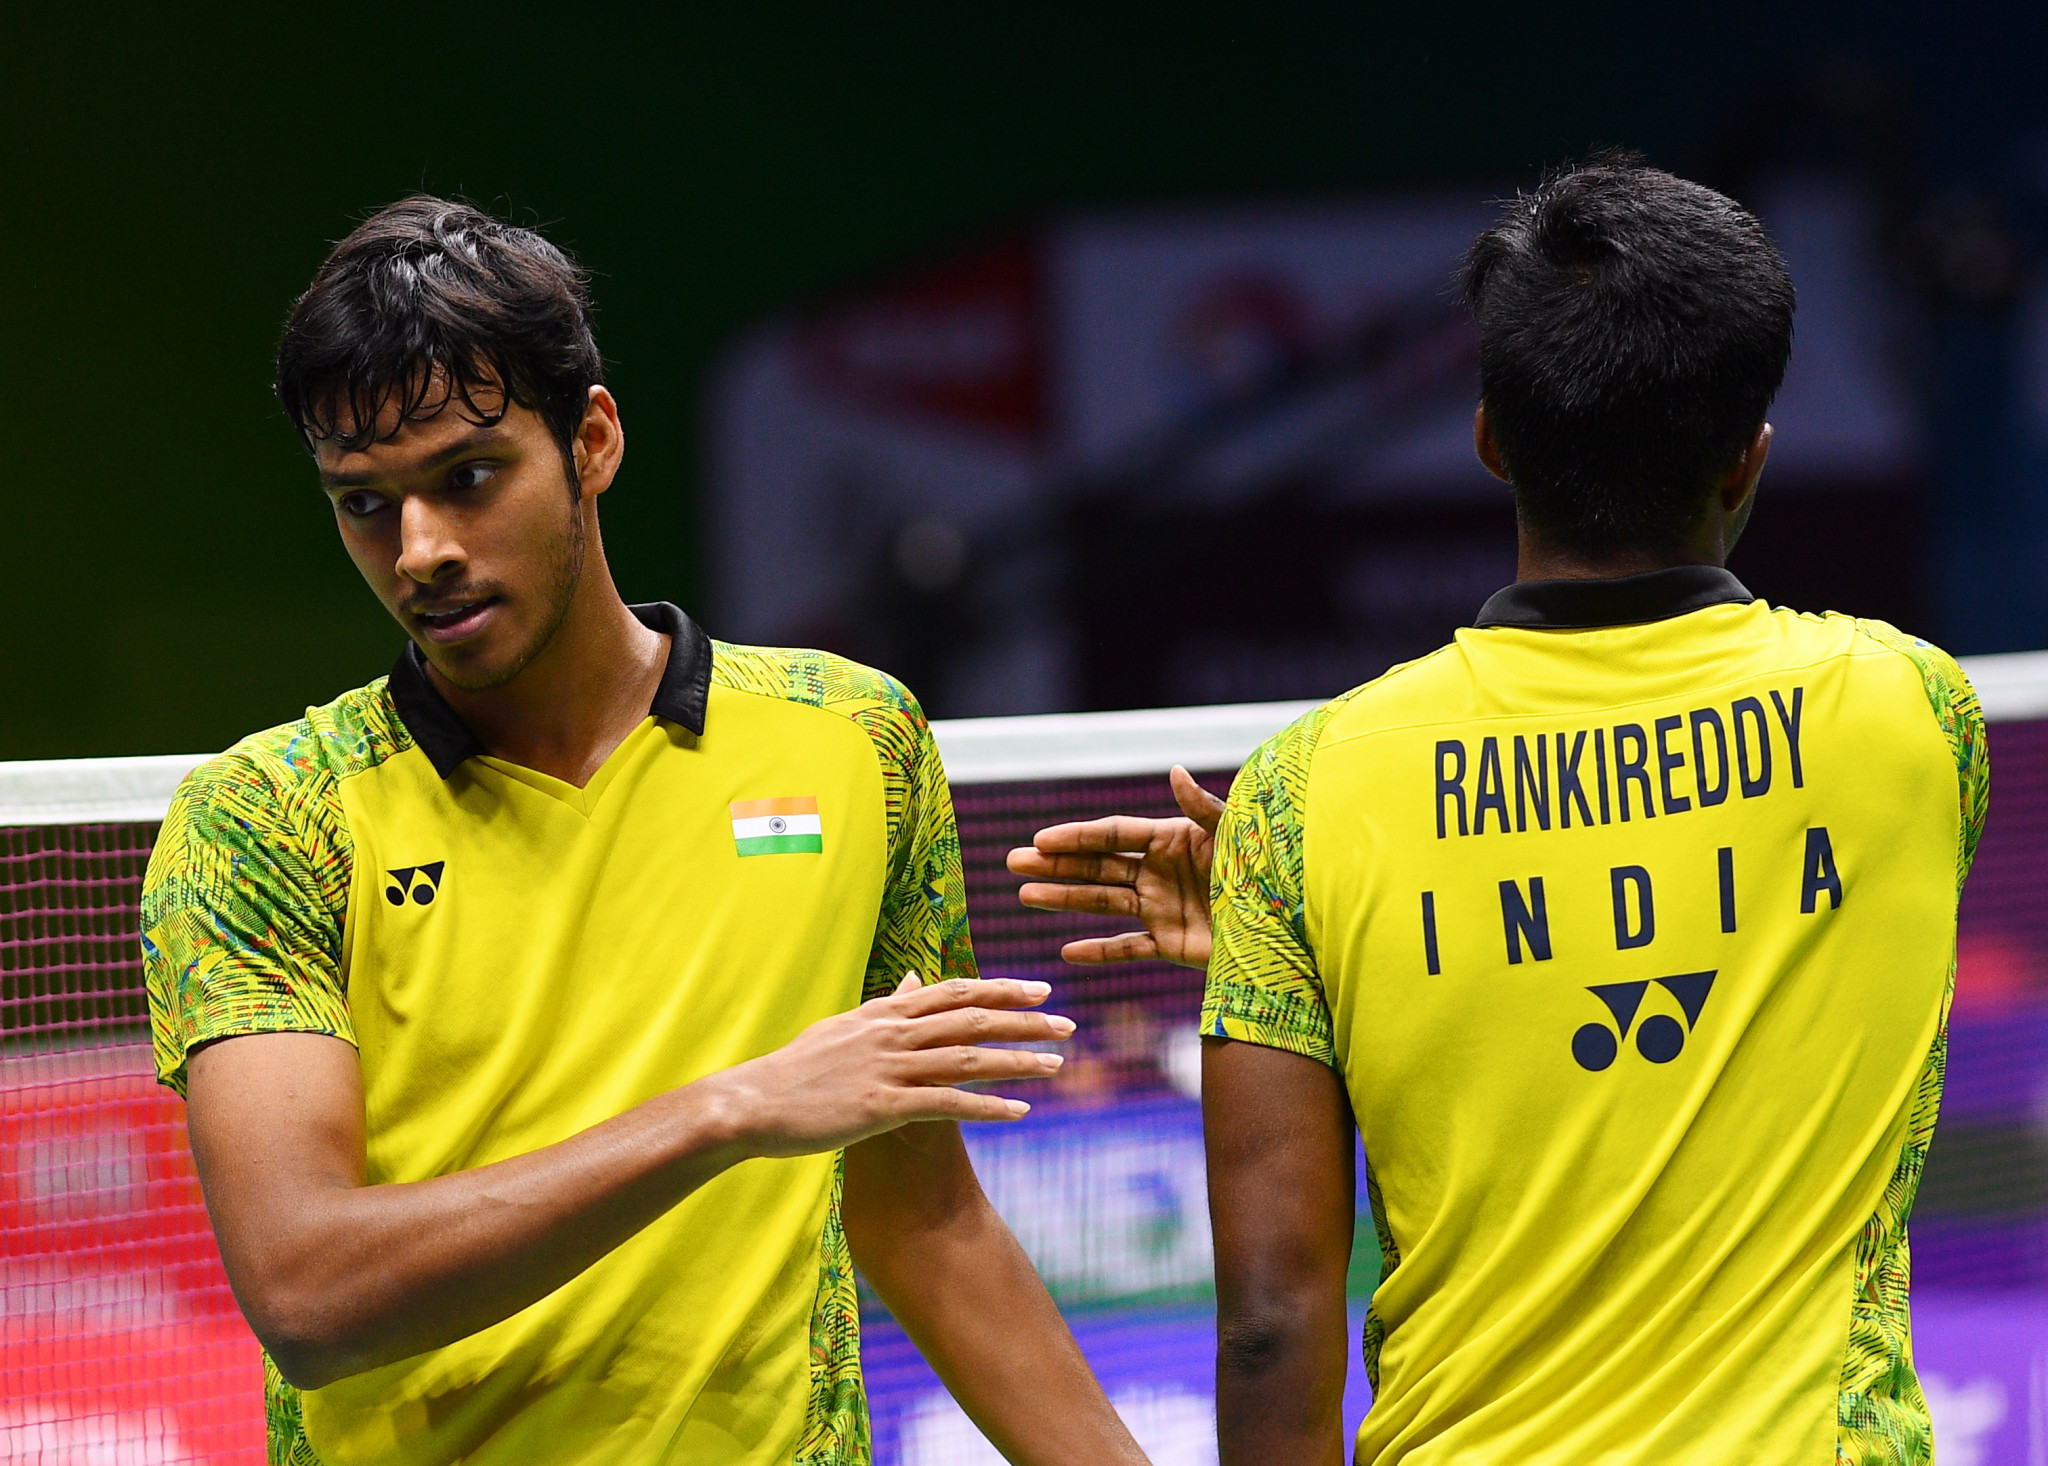 Satwiksairaj Rankireddy and Chirag Shetty will look to use home advantage as they take on the second seeds in the men's doubles final ©Getty Images